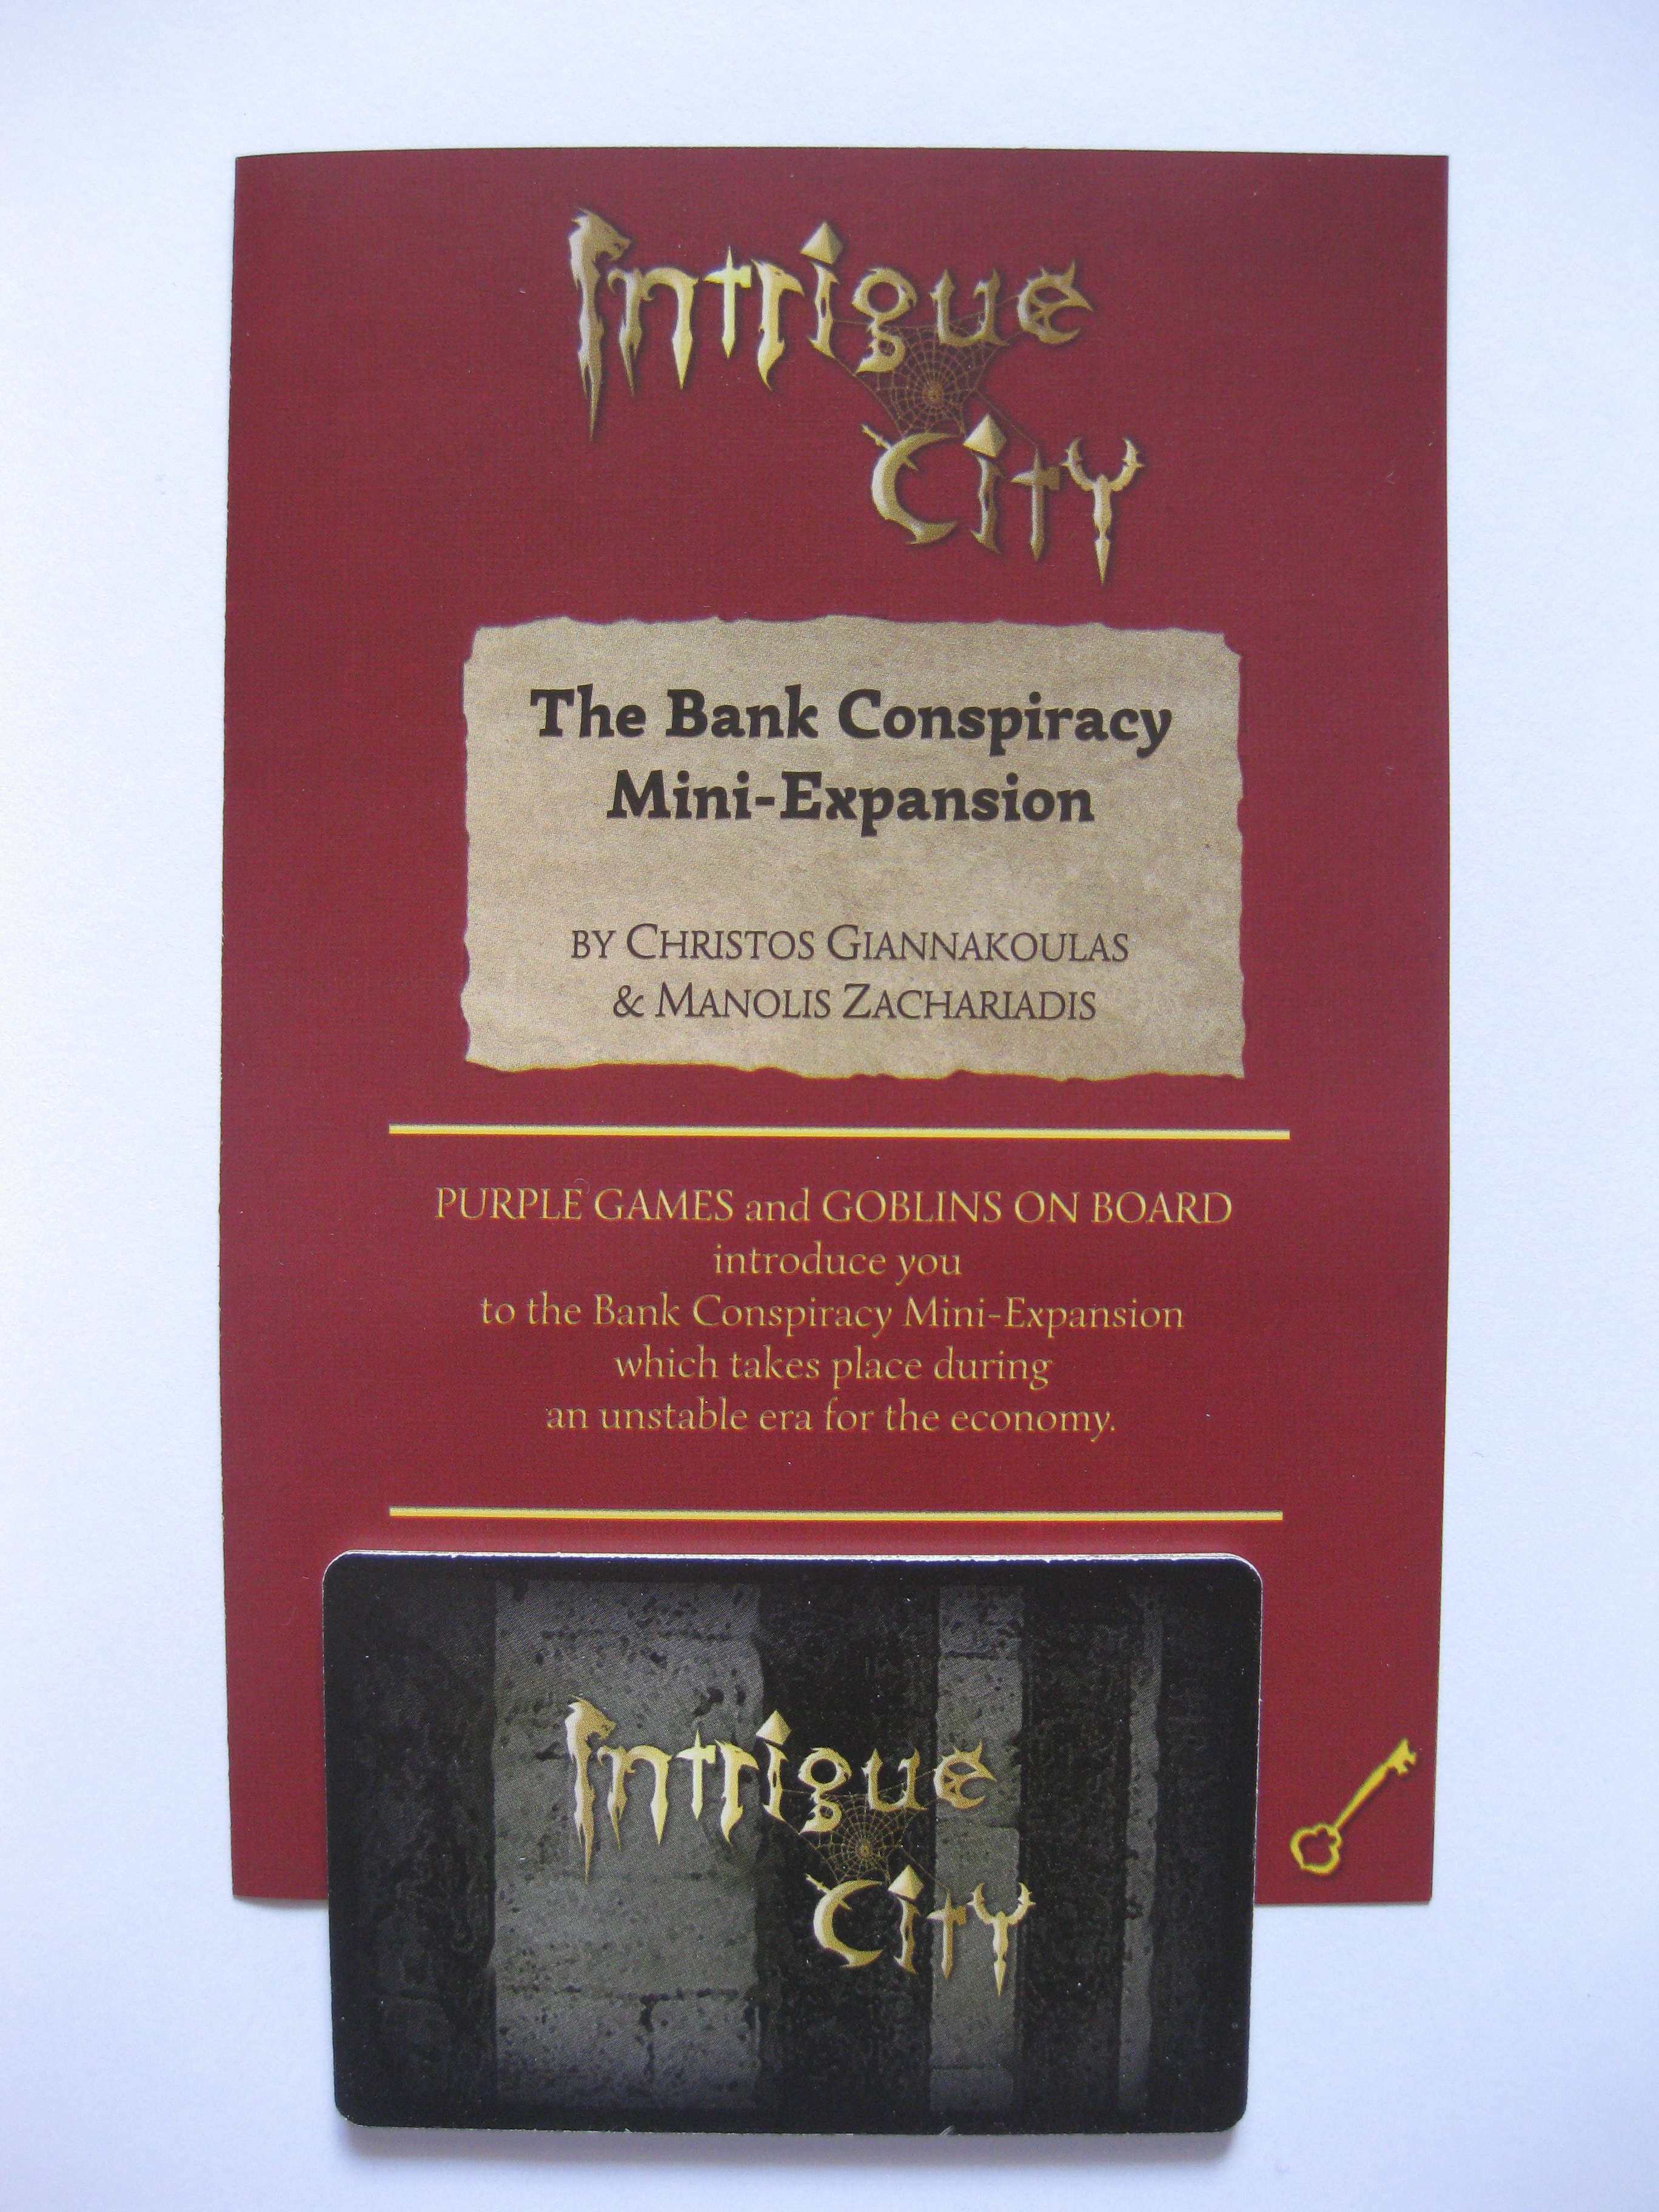 Intrigue City: The Bank Conspiracy (Mini-Expansion)